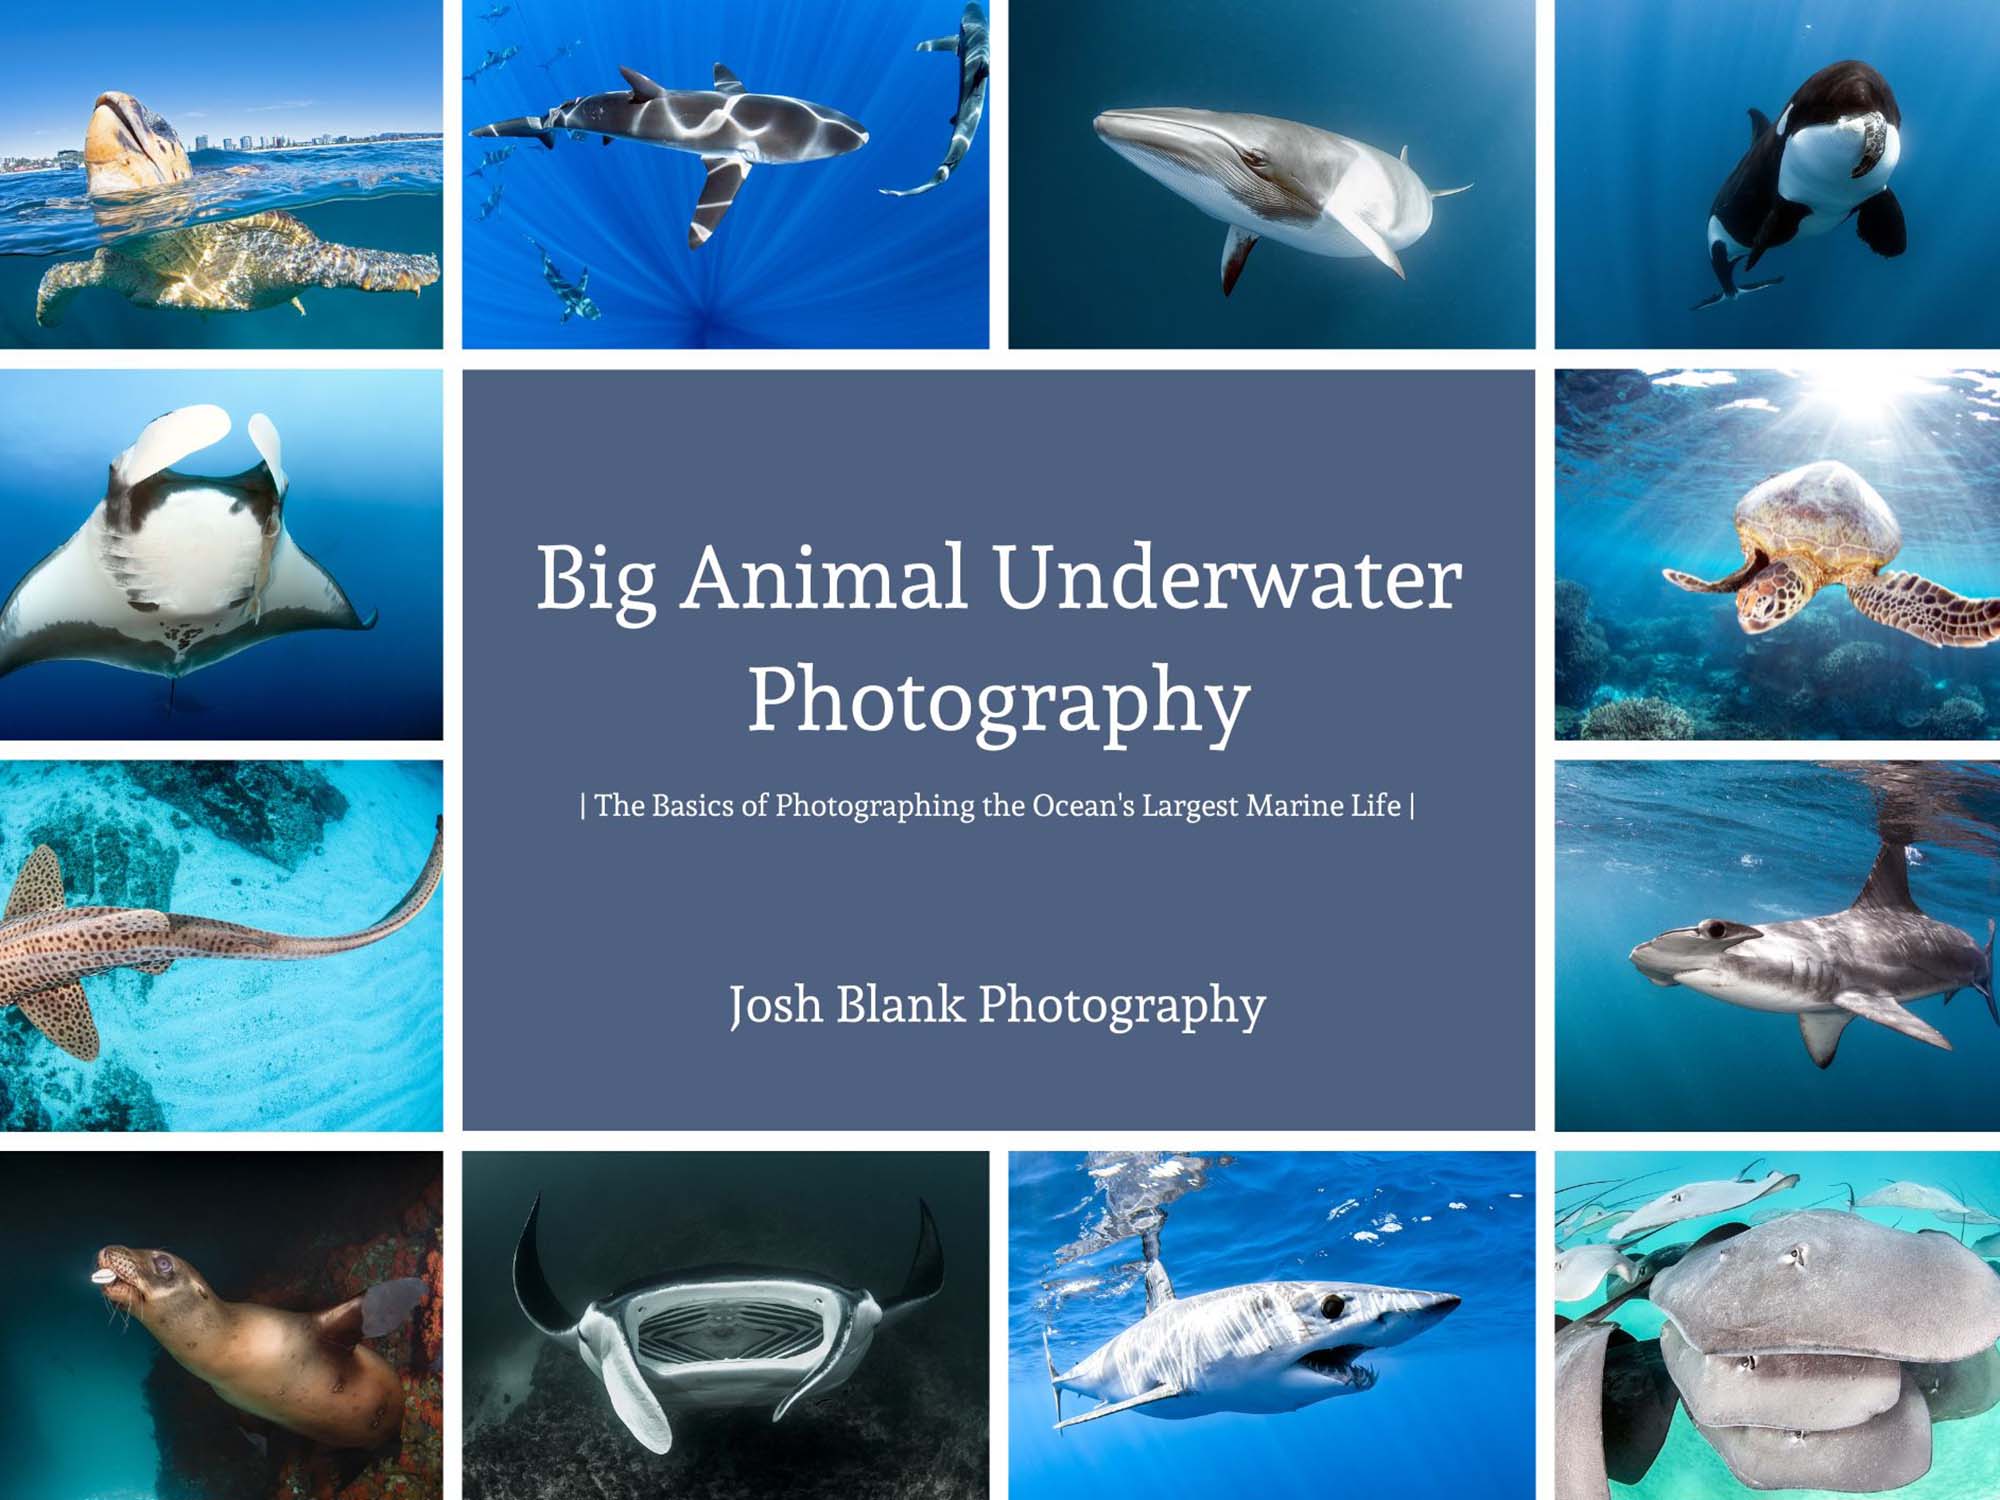 Book Review: Big Animal Underwater Photography